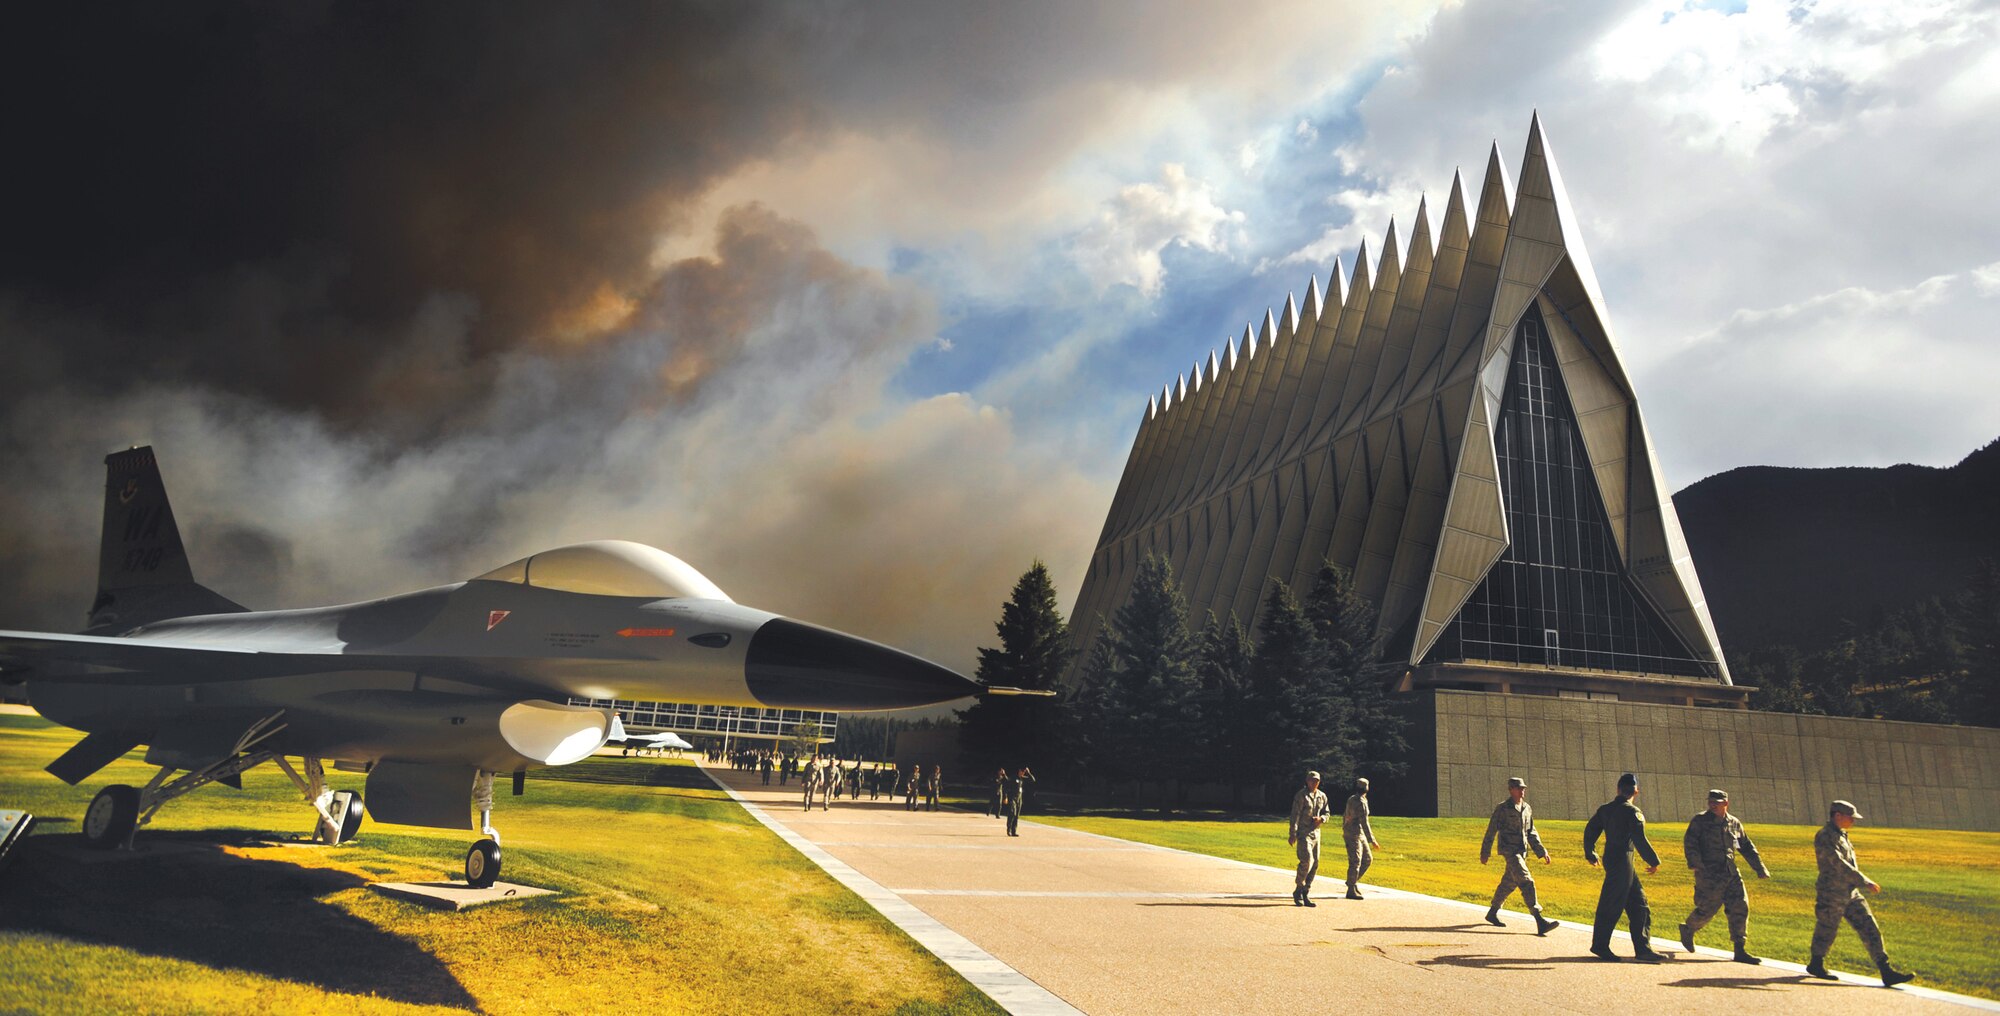 An ominous cloud of smoke from the Waldo Canyon Fire rises from the south behind the Air Force Academy's Cadet Chapel as cadets head for a briefing on evacuation procedures June 27, 2012. The Academy evacuated more than 600 families and 110 dormitory residents from the base the evening of June 27. (U.S. Air Force photo/Carol Lawrence)